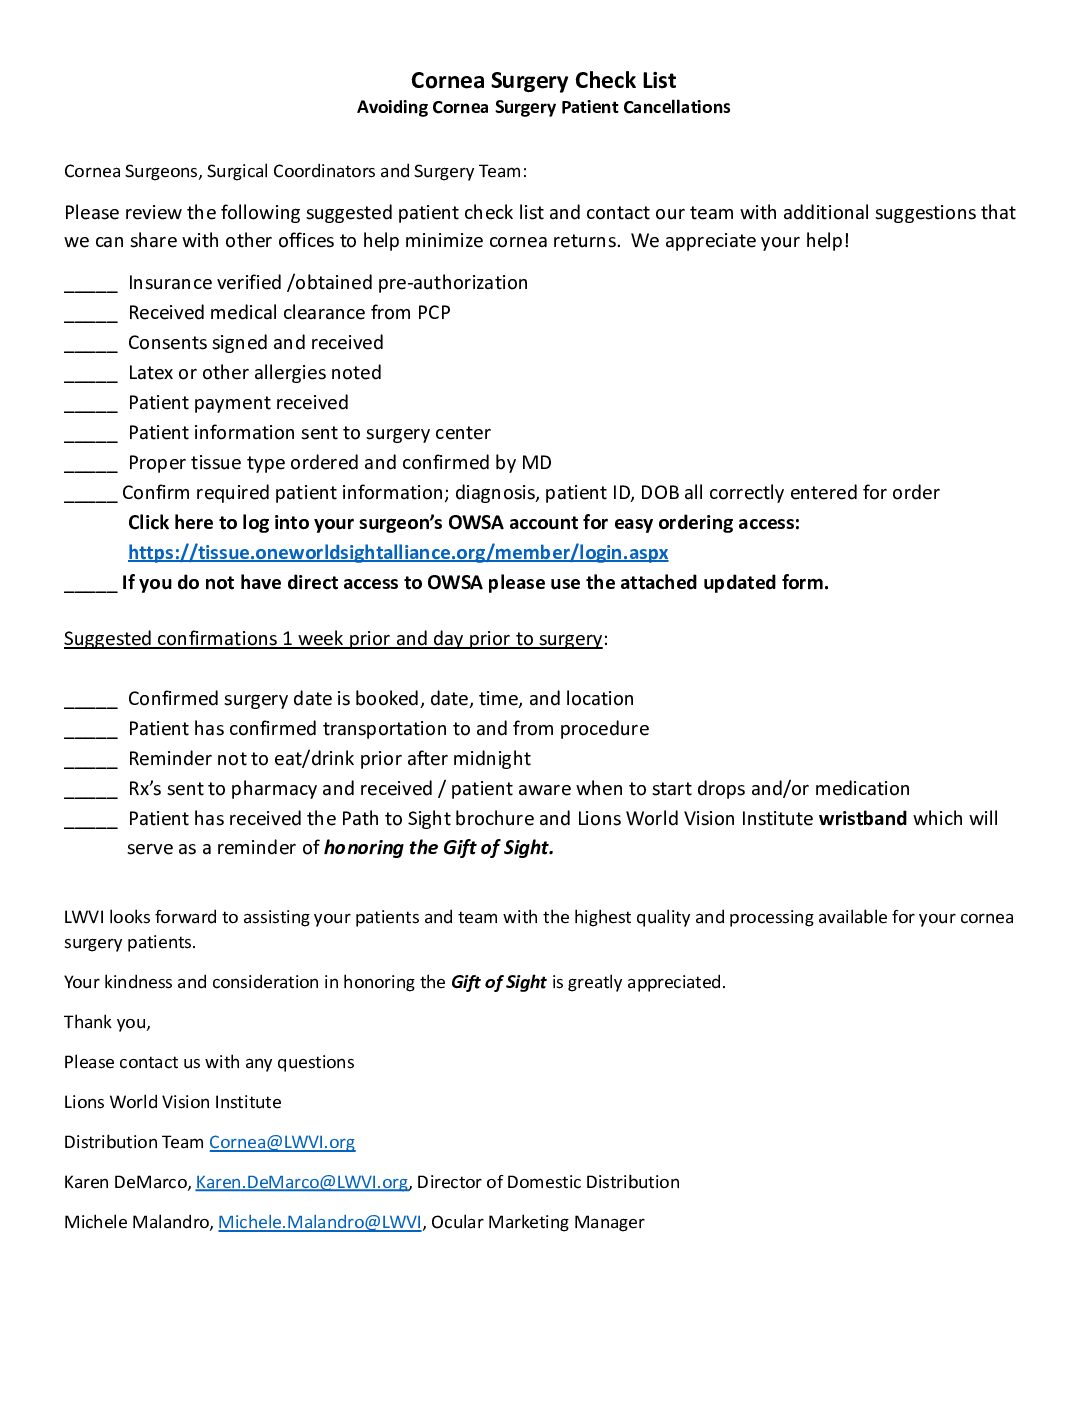 Click to open the Surgical Coordinator Checklist file